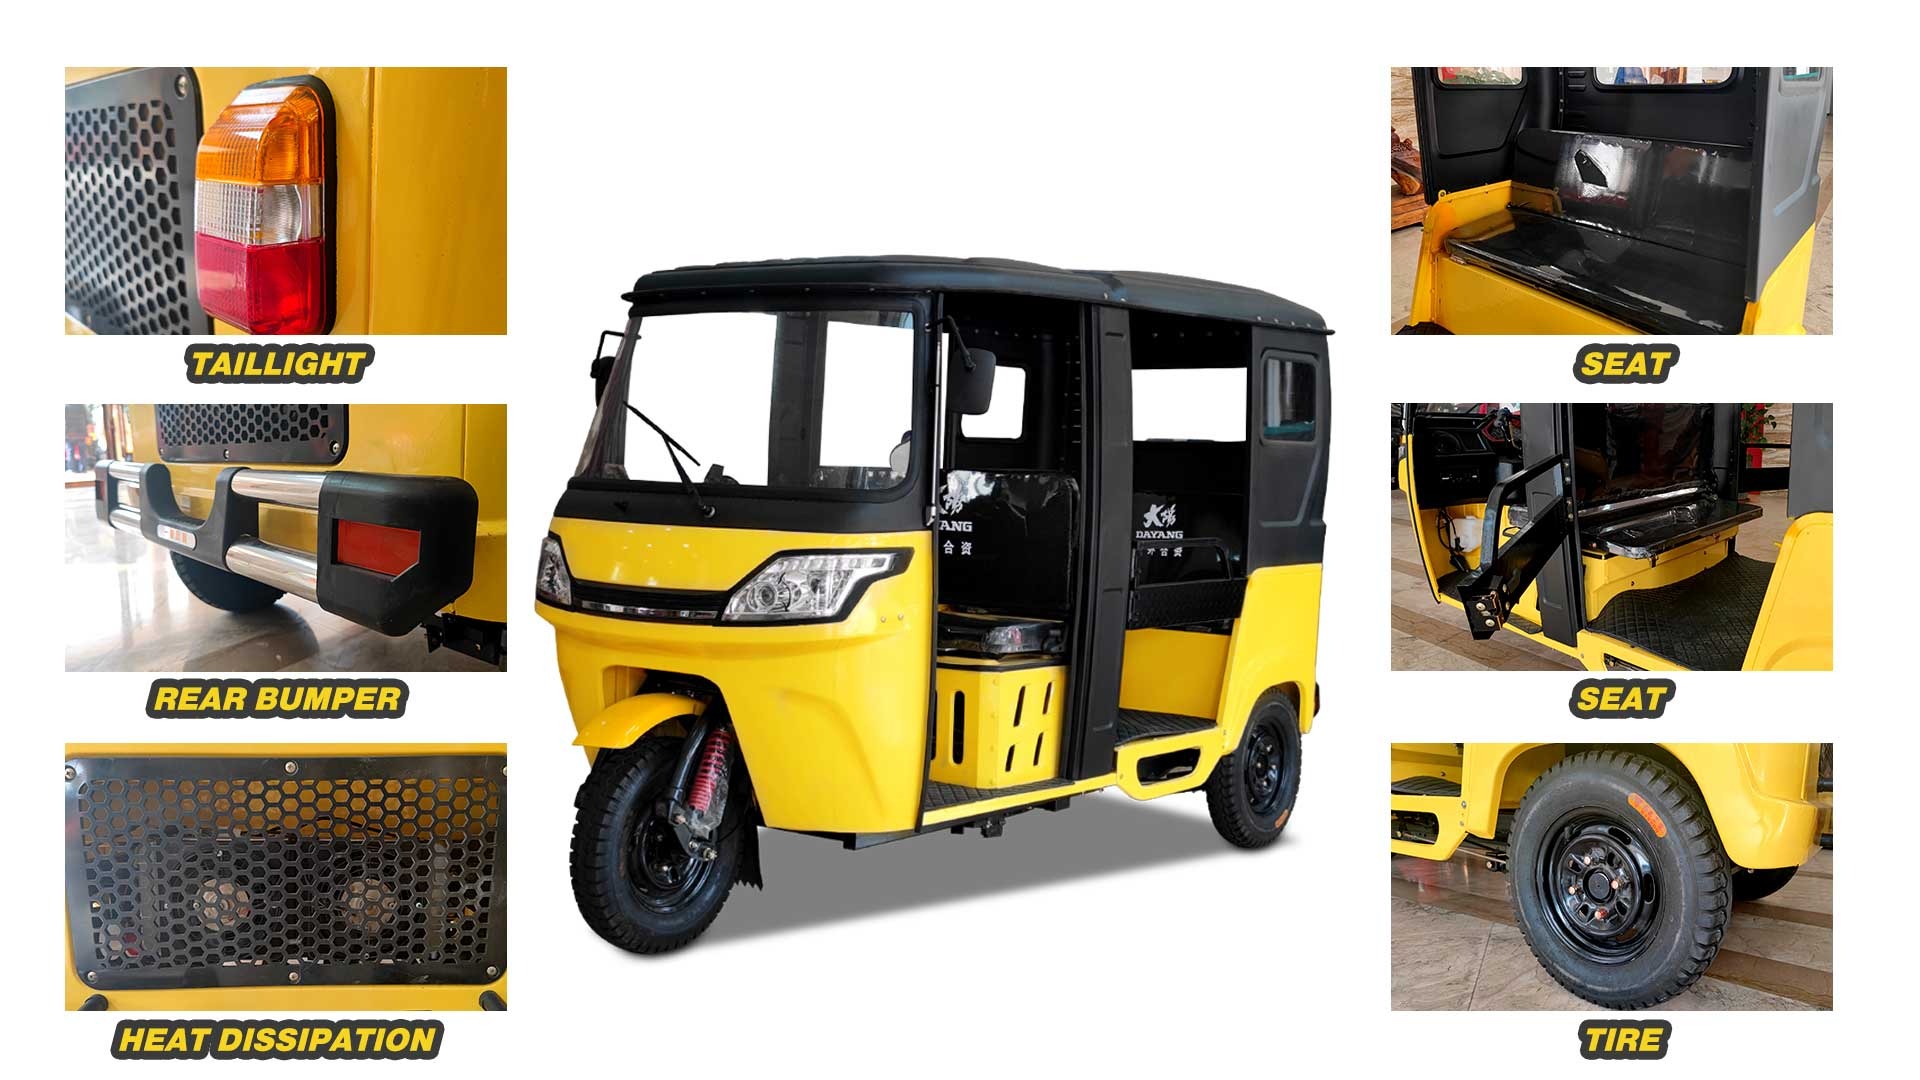 DY-T1 Newest bajaj model for taxi and passenger model of 200CC